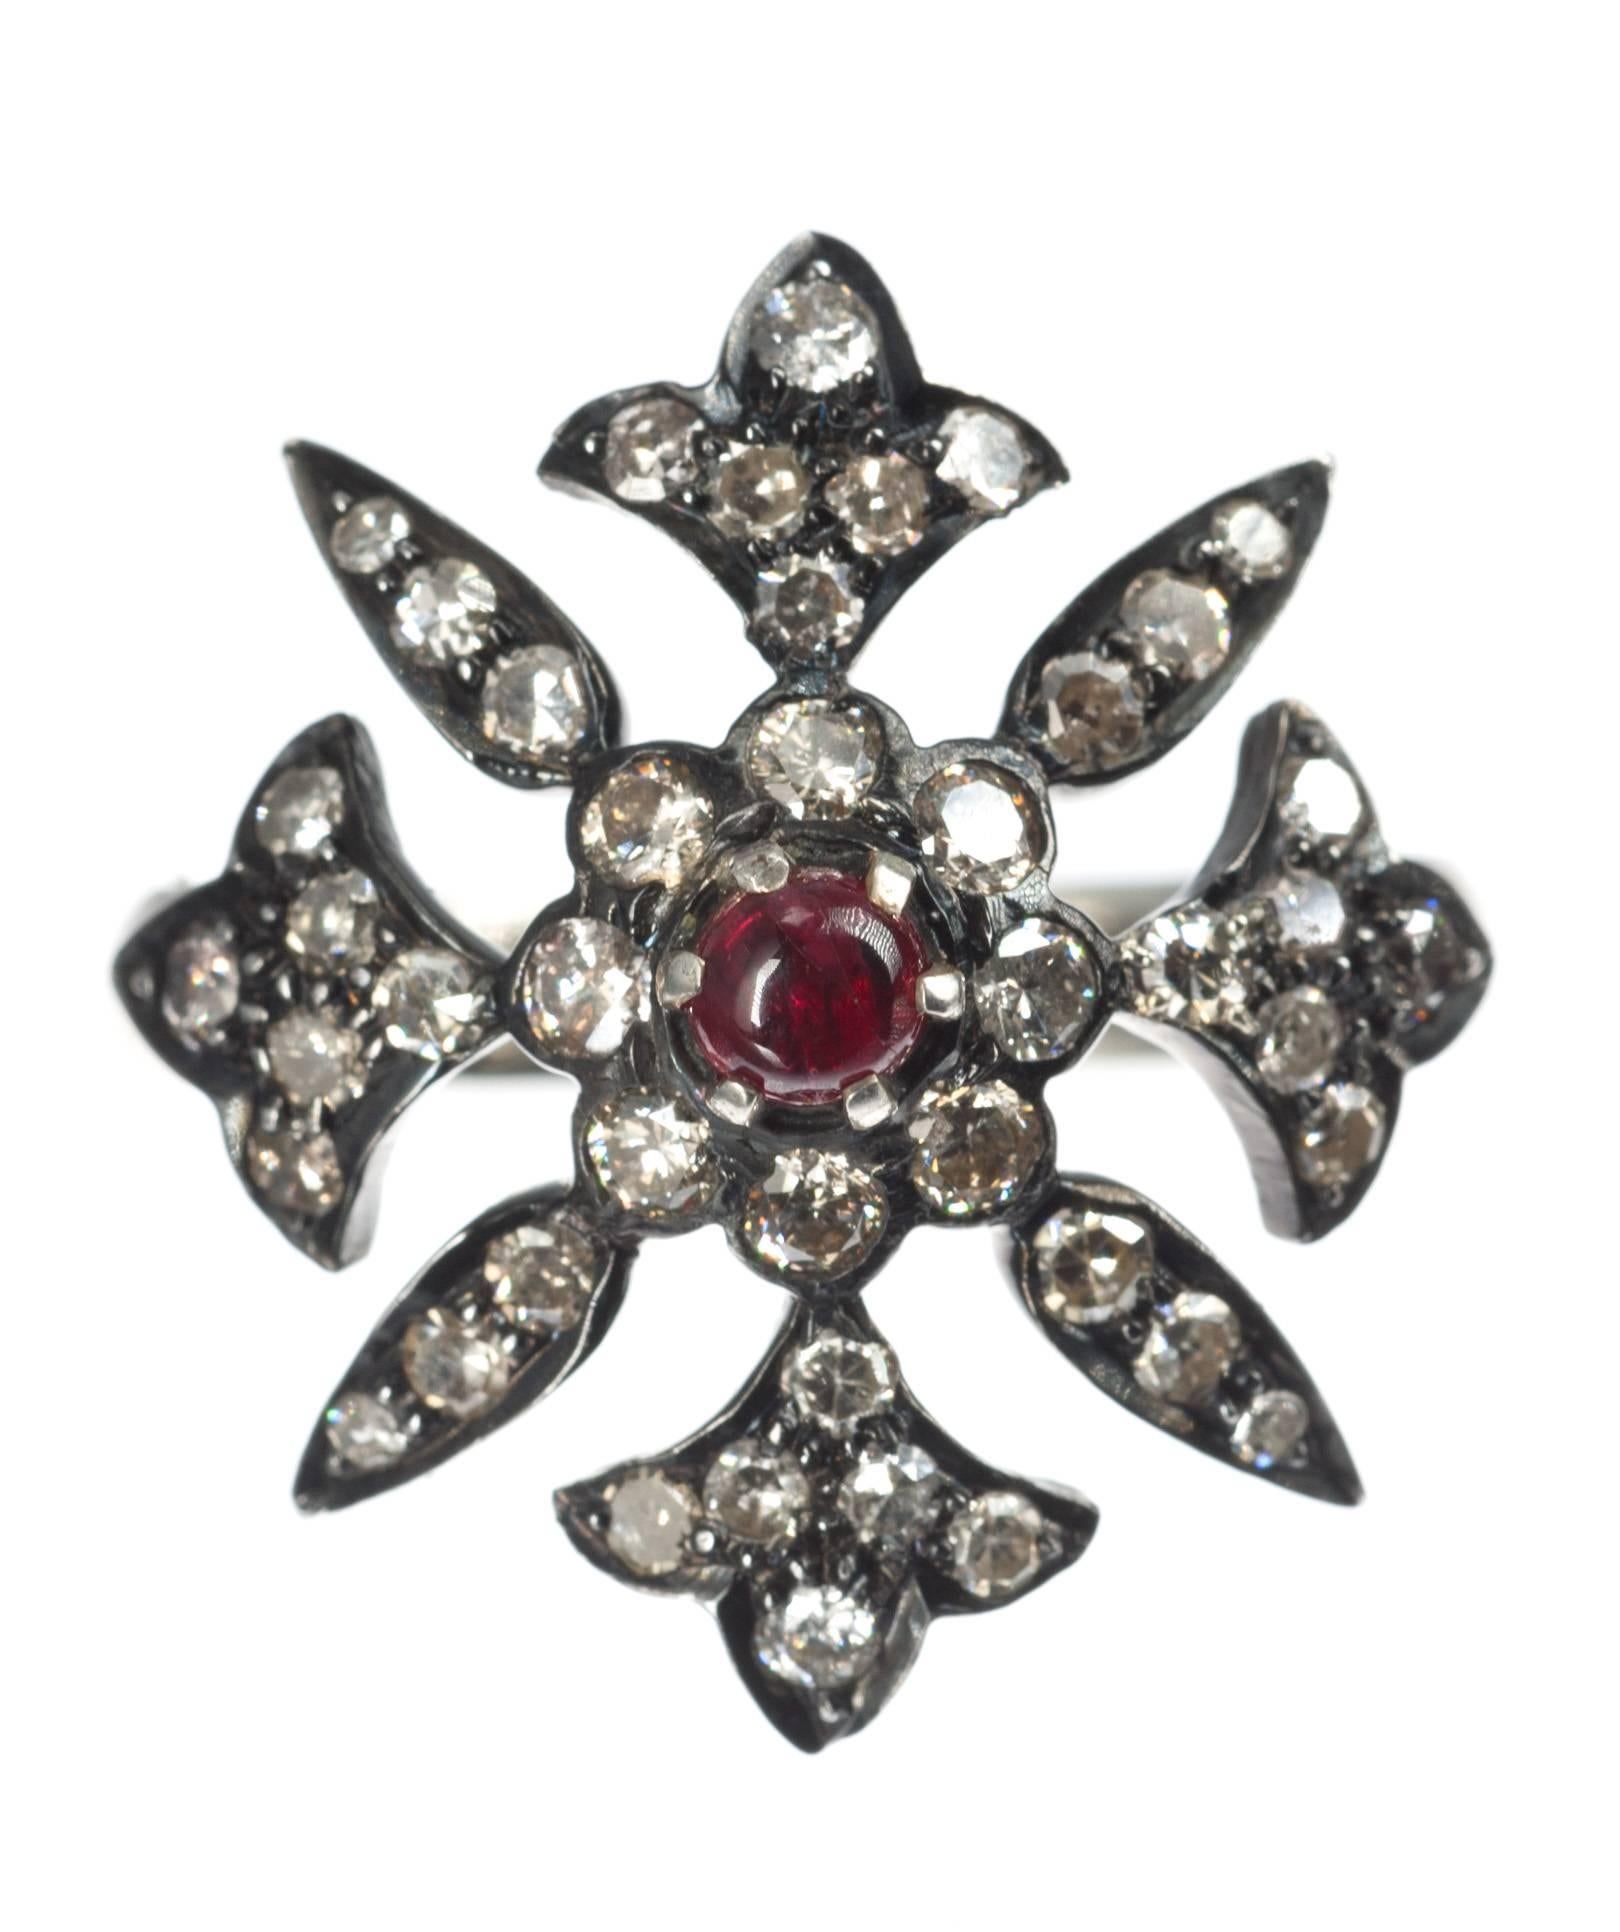 A red cabochon spinel, 3.5mm, is the focal point of this Greek cross ring. Forty-four full- and single-cut round diamonds, 1.55ctw., strike a stunning contrast set against the black-rhodium finished, 14-karat white gold cross. Size 6.5; can be sized.